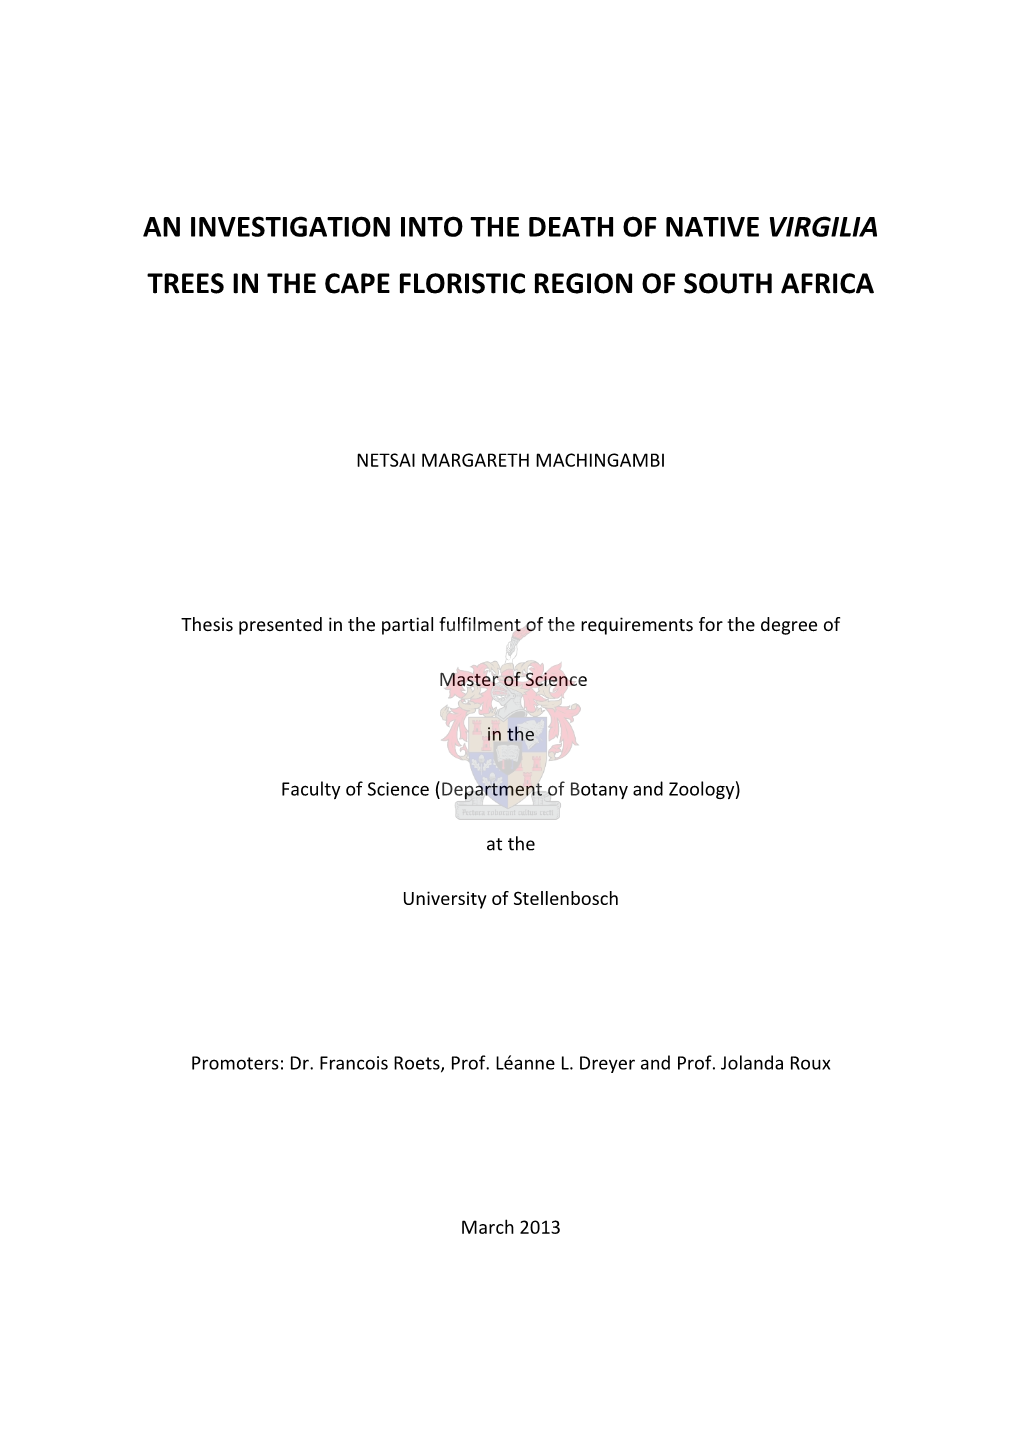 An Investigation Into the Death of Native Virgilia Trees in the Cape Floristic Region of South Africa